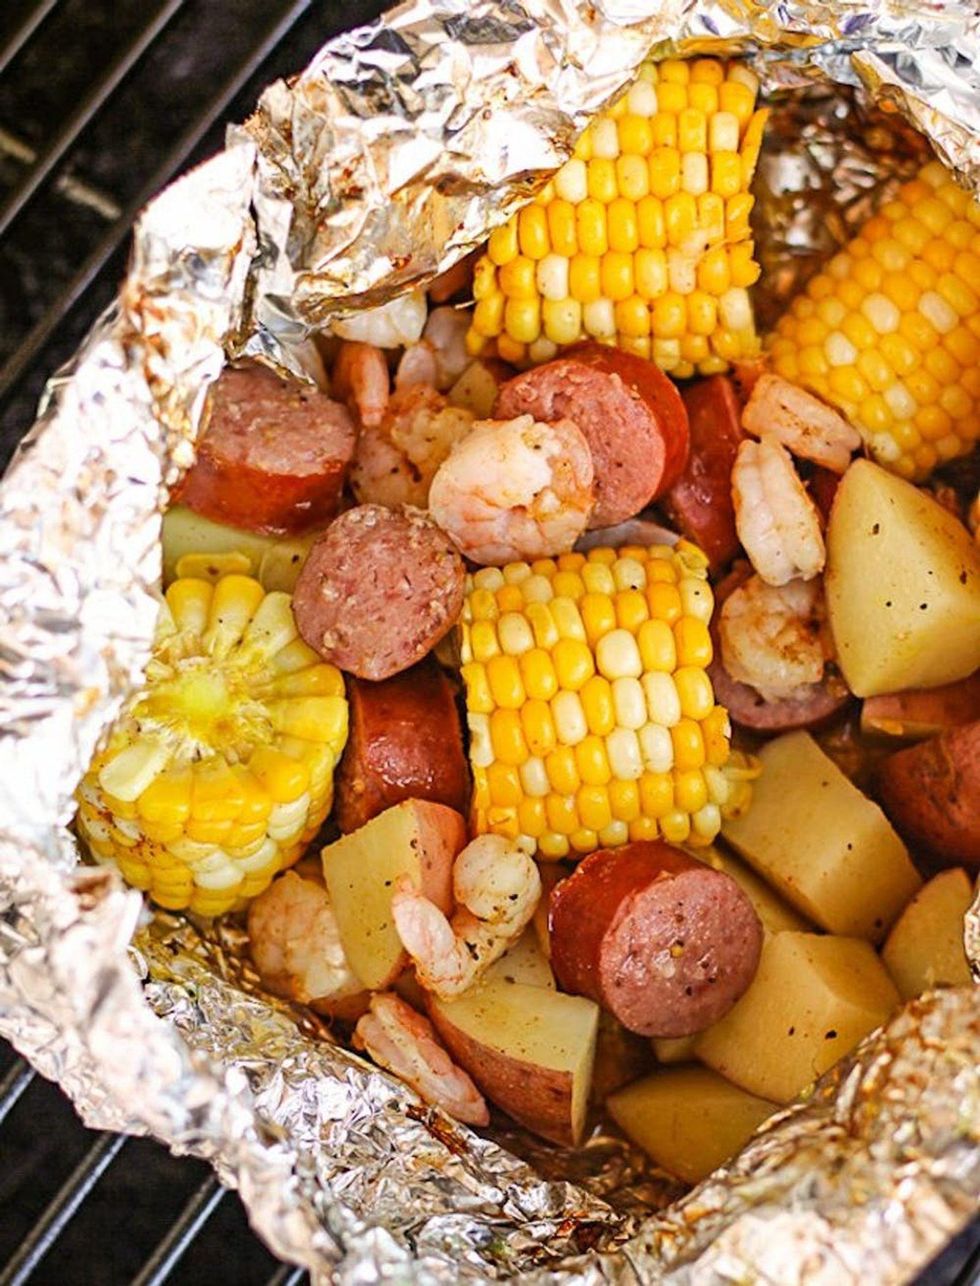 Cajun-Style Grill Foil Packets